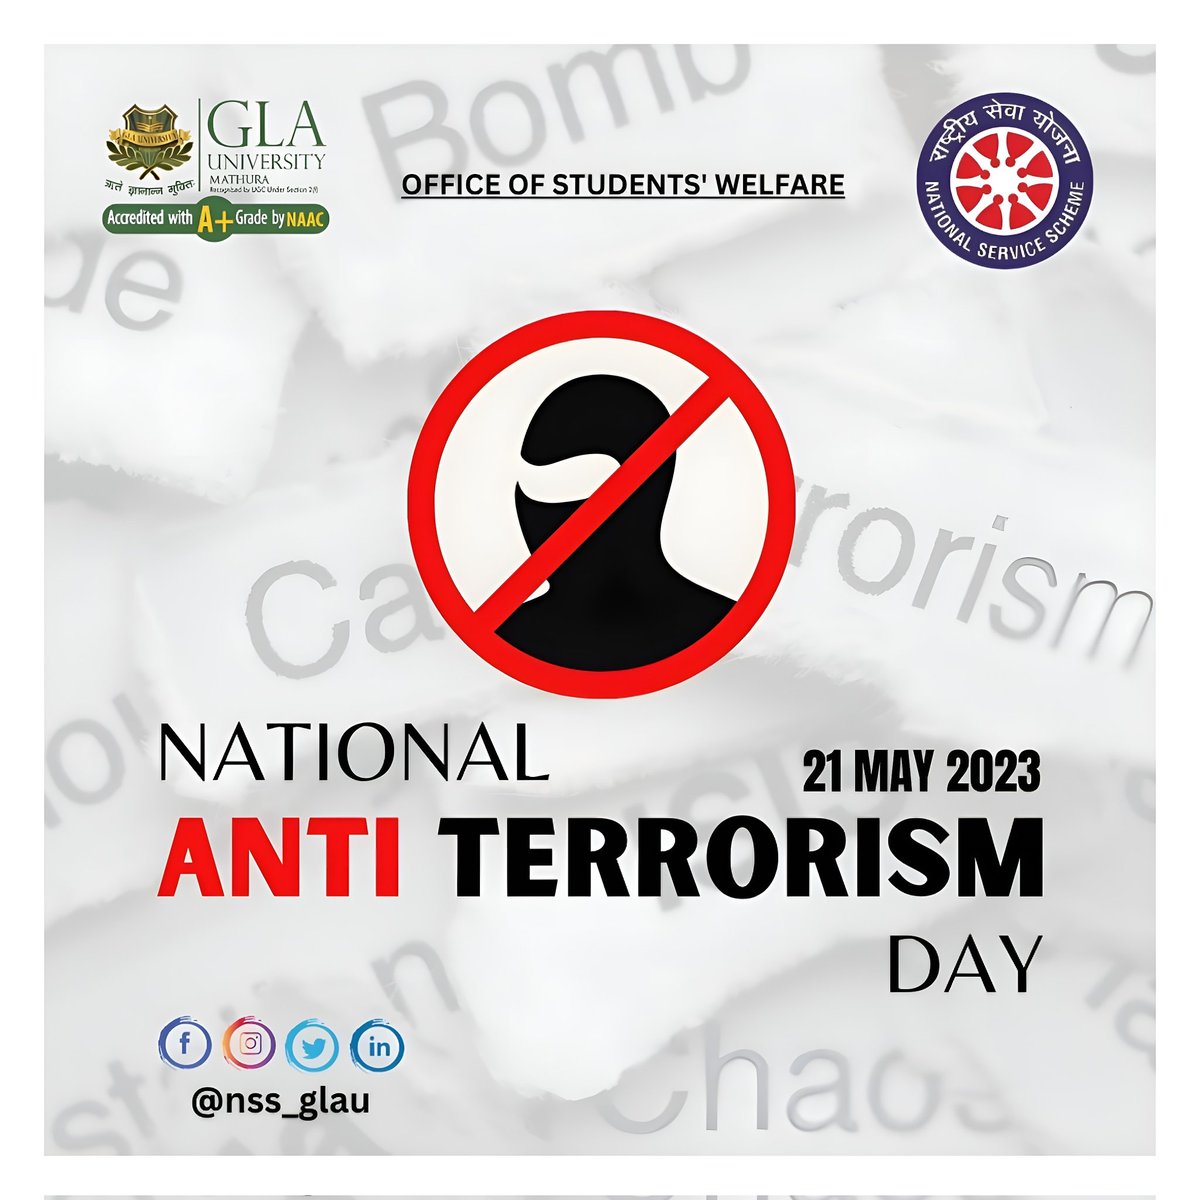 The National Anti-Terrorism Day is observed on 21 May in India every year to commemorate the death anniversary of former Indian PM Rajiv Gandhi. ☮️

#nssglau #NationalAntiTerrorismDay_2023

*Follow NSS-GLAU for more info:* 

INSTAGRAM:- bit.ly/2Ub4tpm